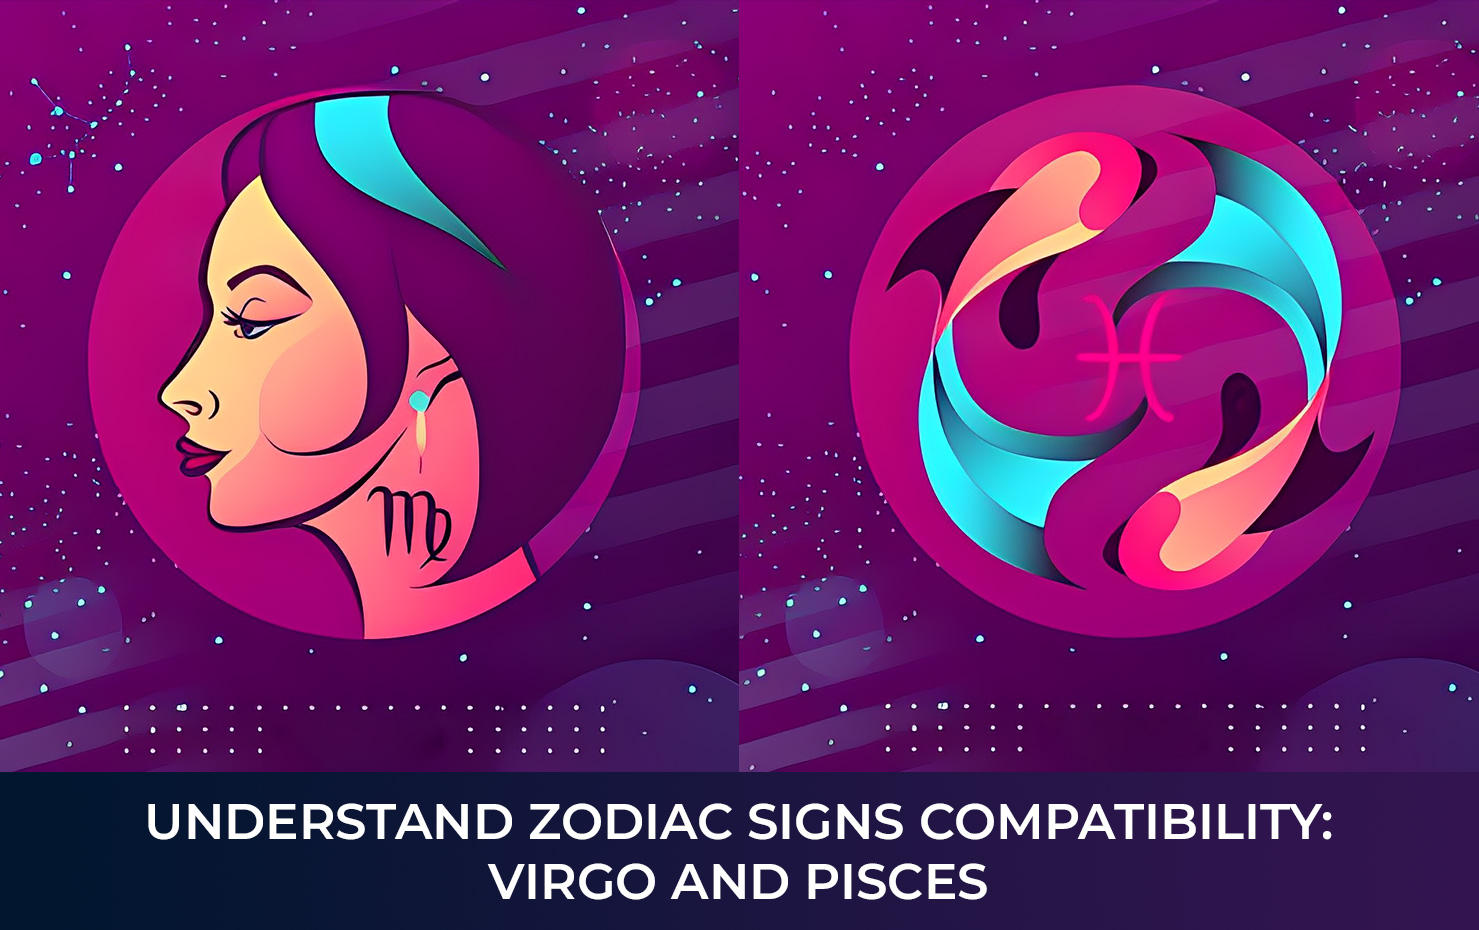 Understand Zodiac Signs Compatibility: Virgo and Pisces